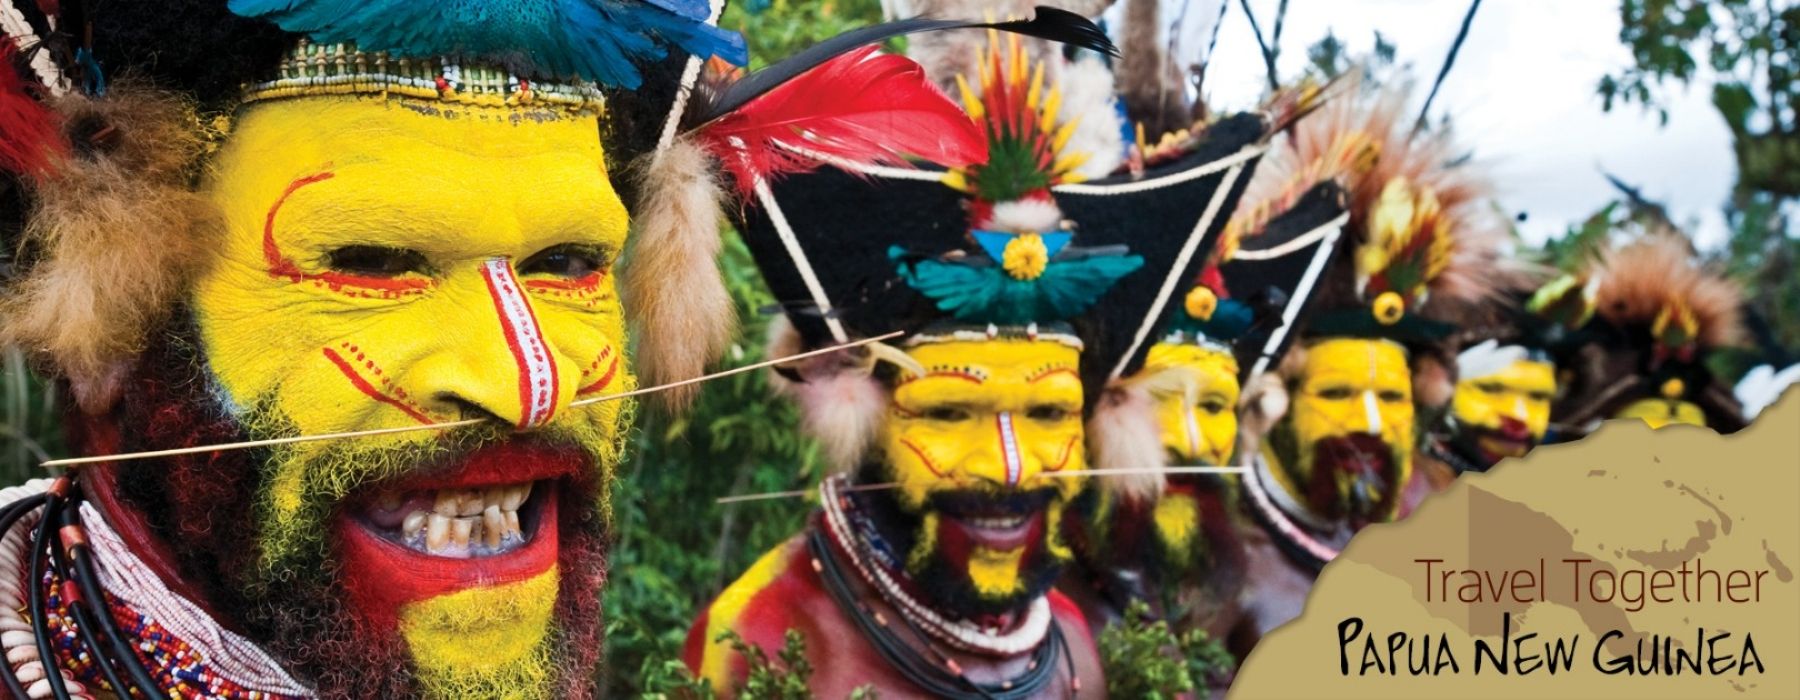 Travel Together to Papua New Guinea